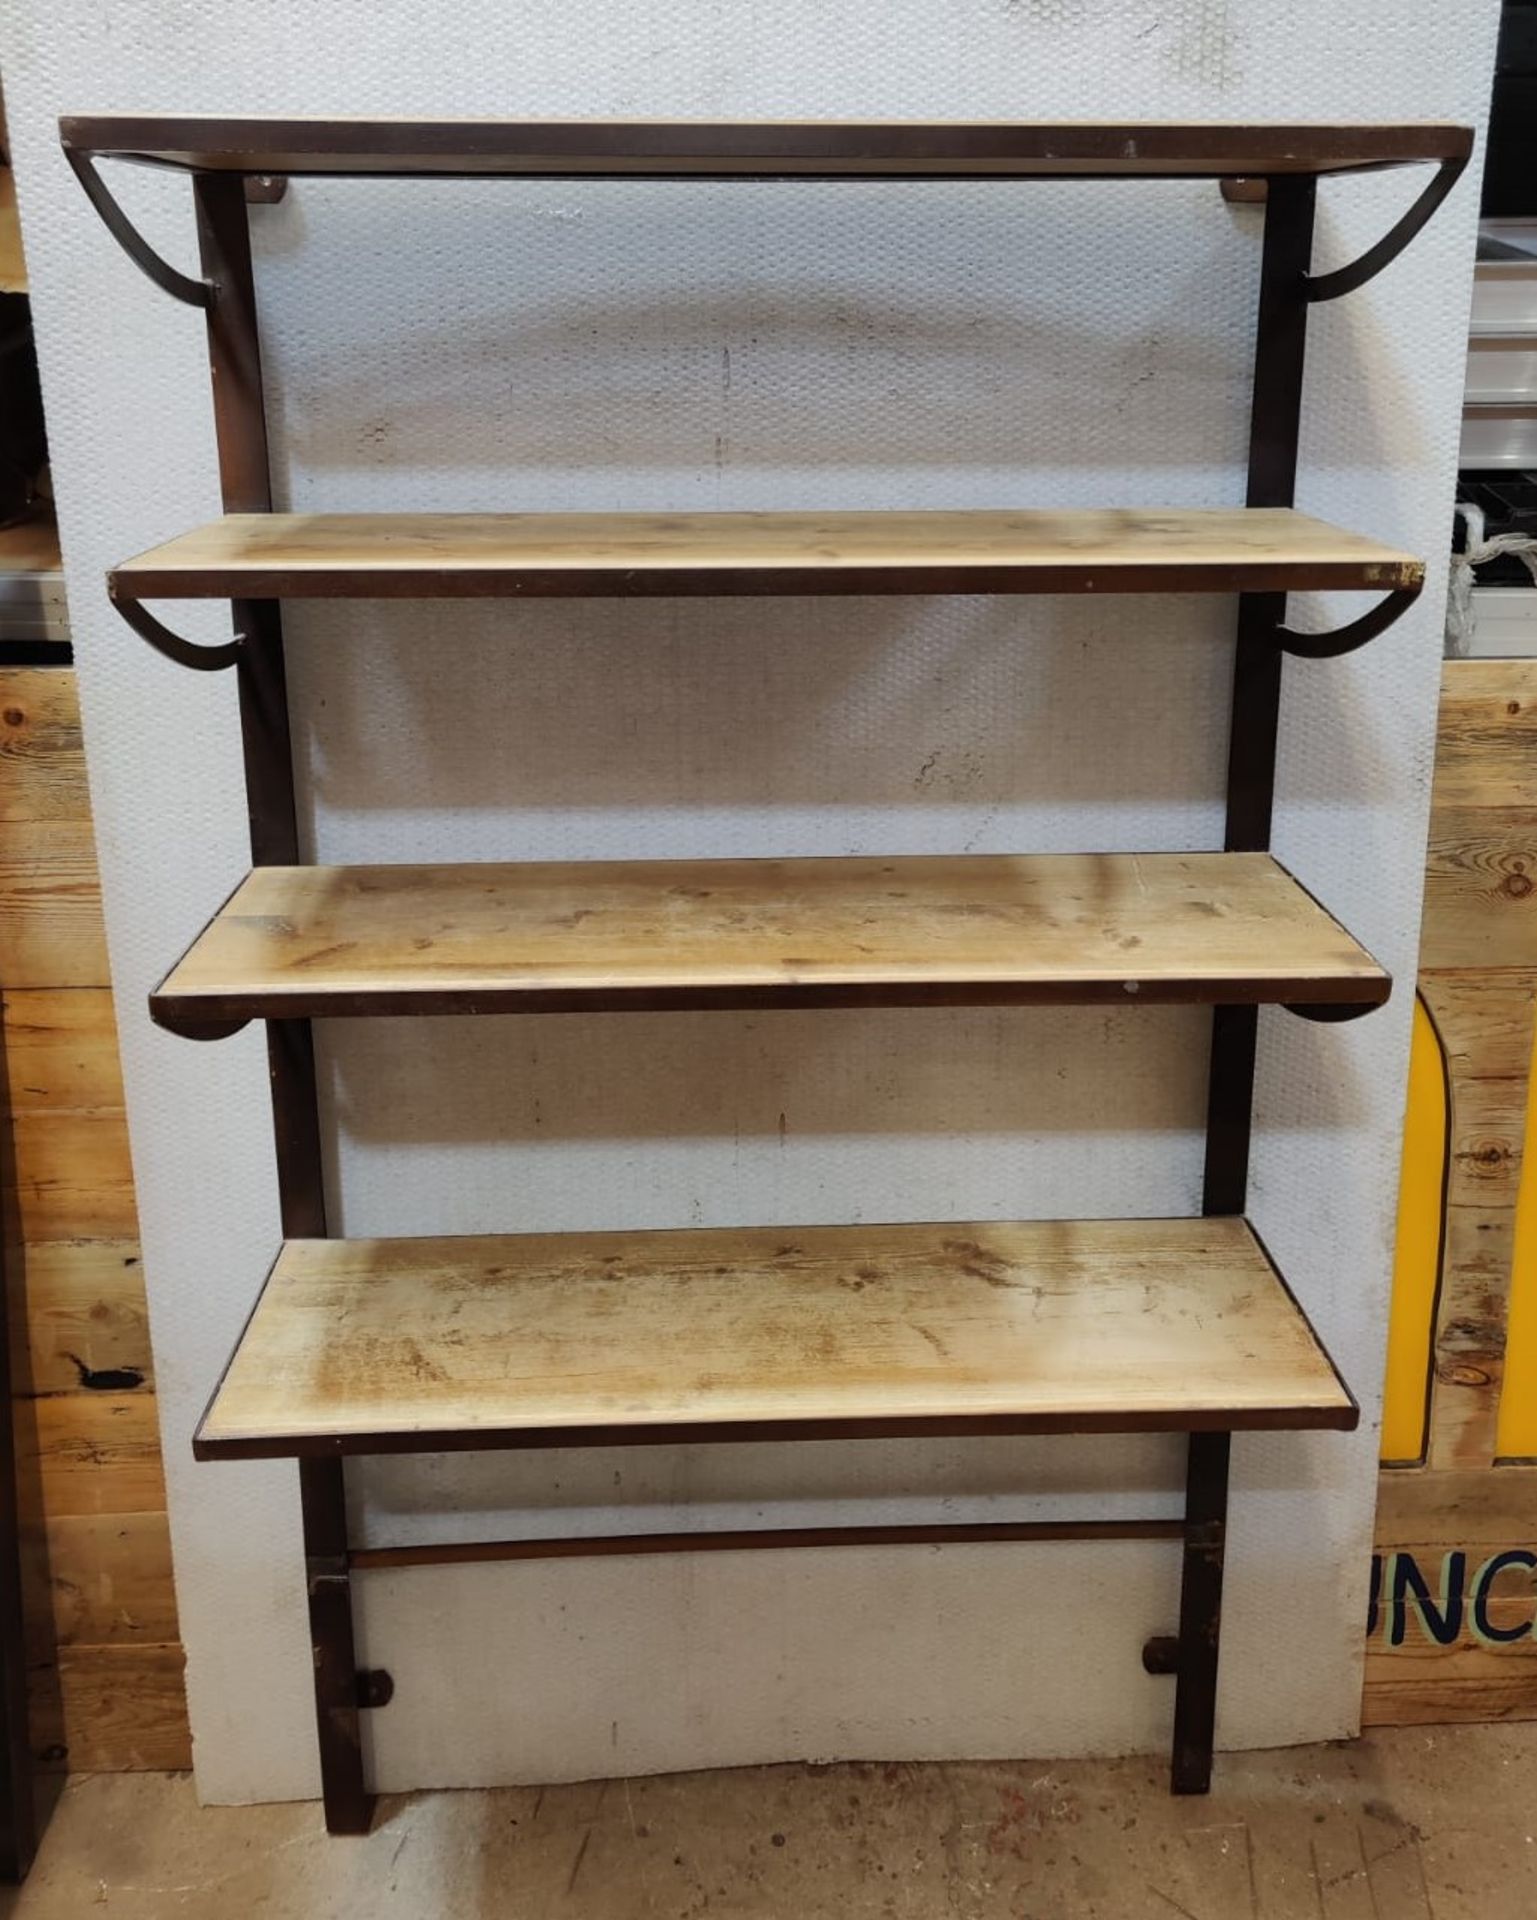 5 x Rustic Bakery Wall Shelf Units With a Rustic Traditional Finish - Over 14ft in Length! - Image 25 of 25